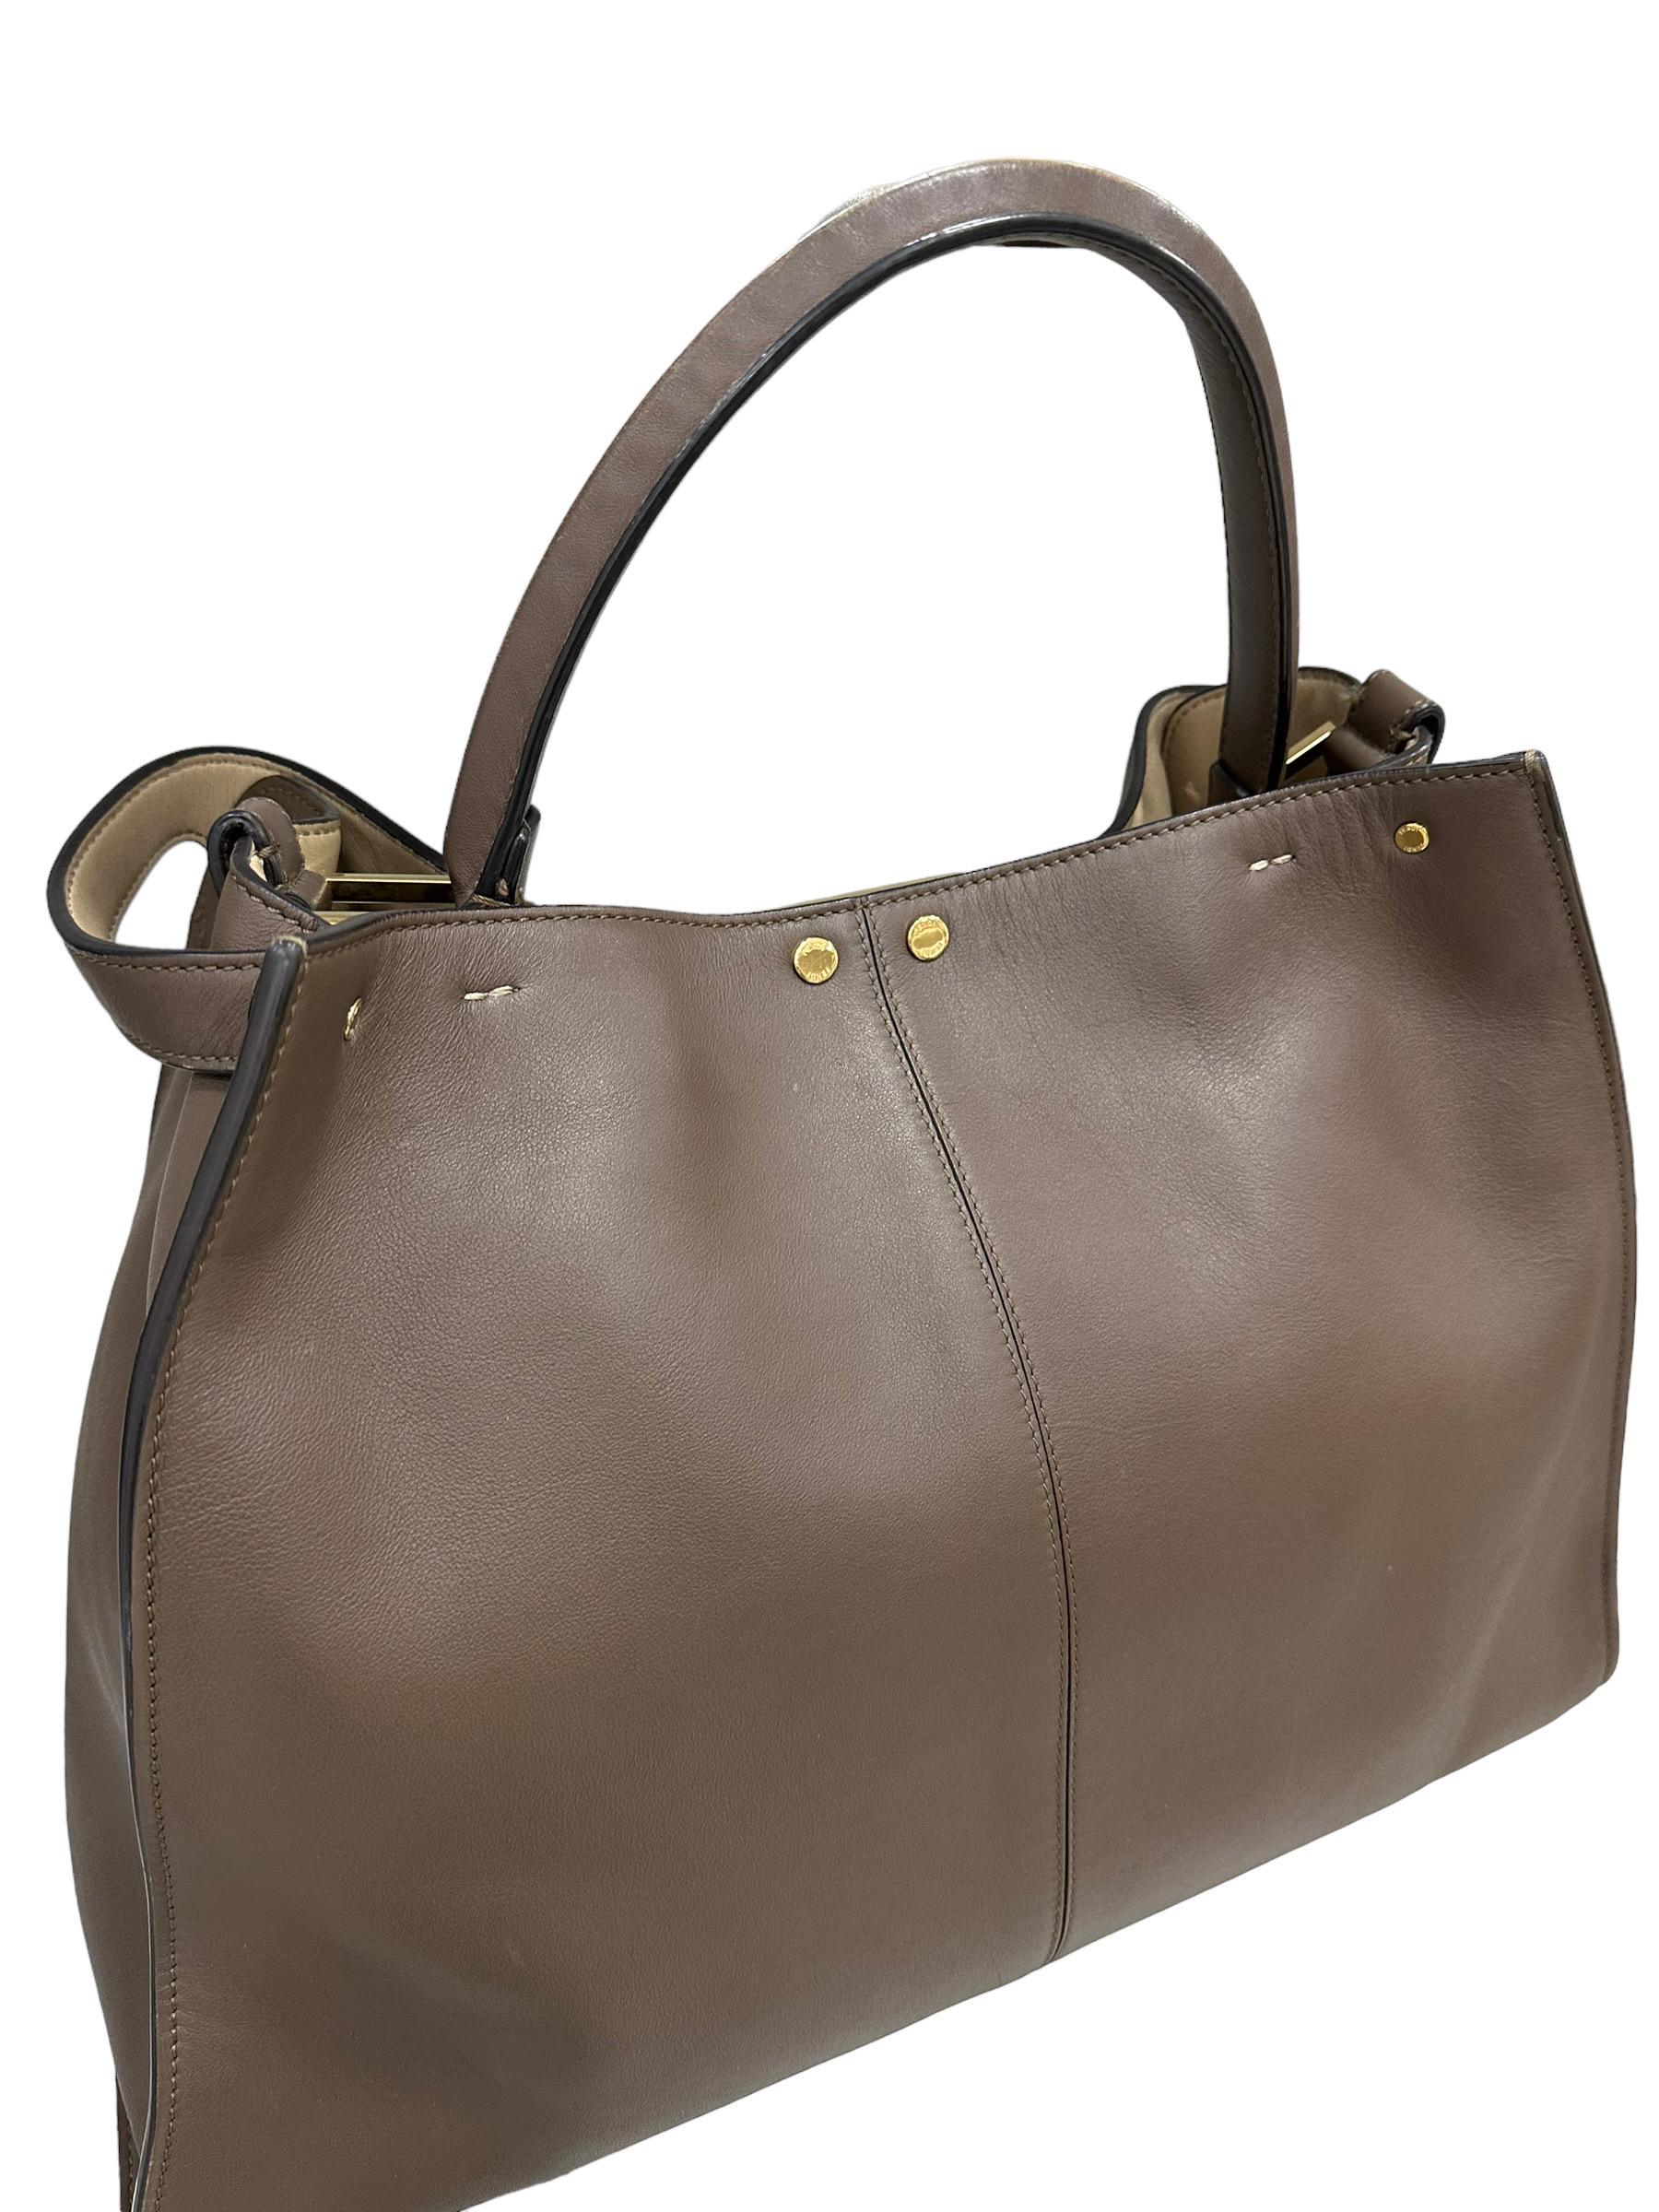 Fendi Peekaboo X-Lite Mud Leather Top Handle Bag In Good Condition In Torre Del Greco, IT